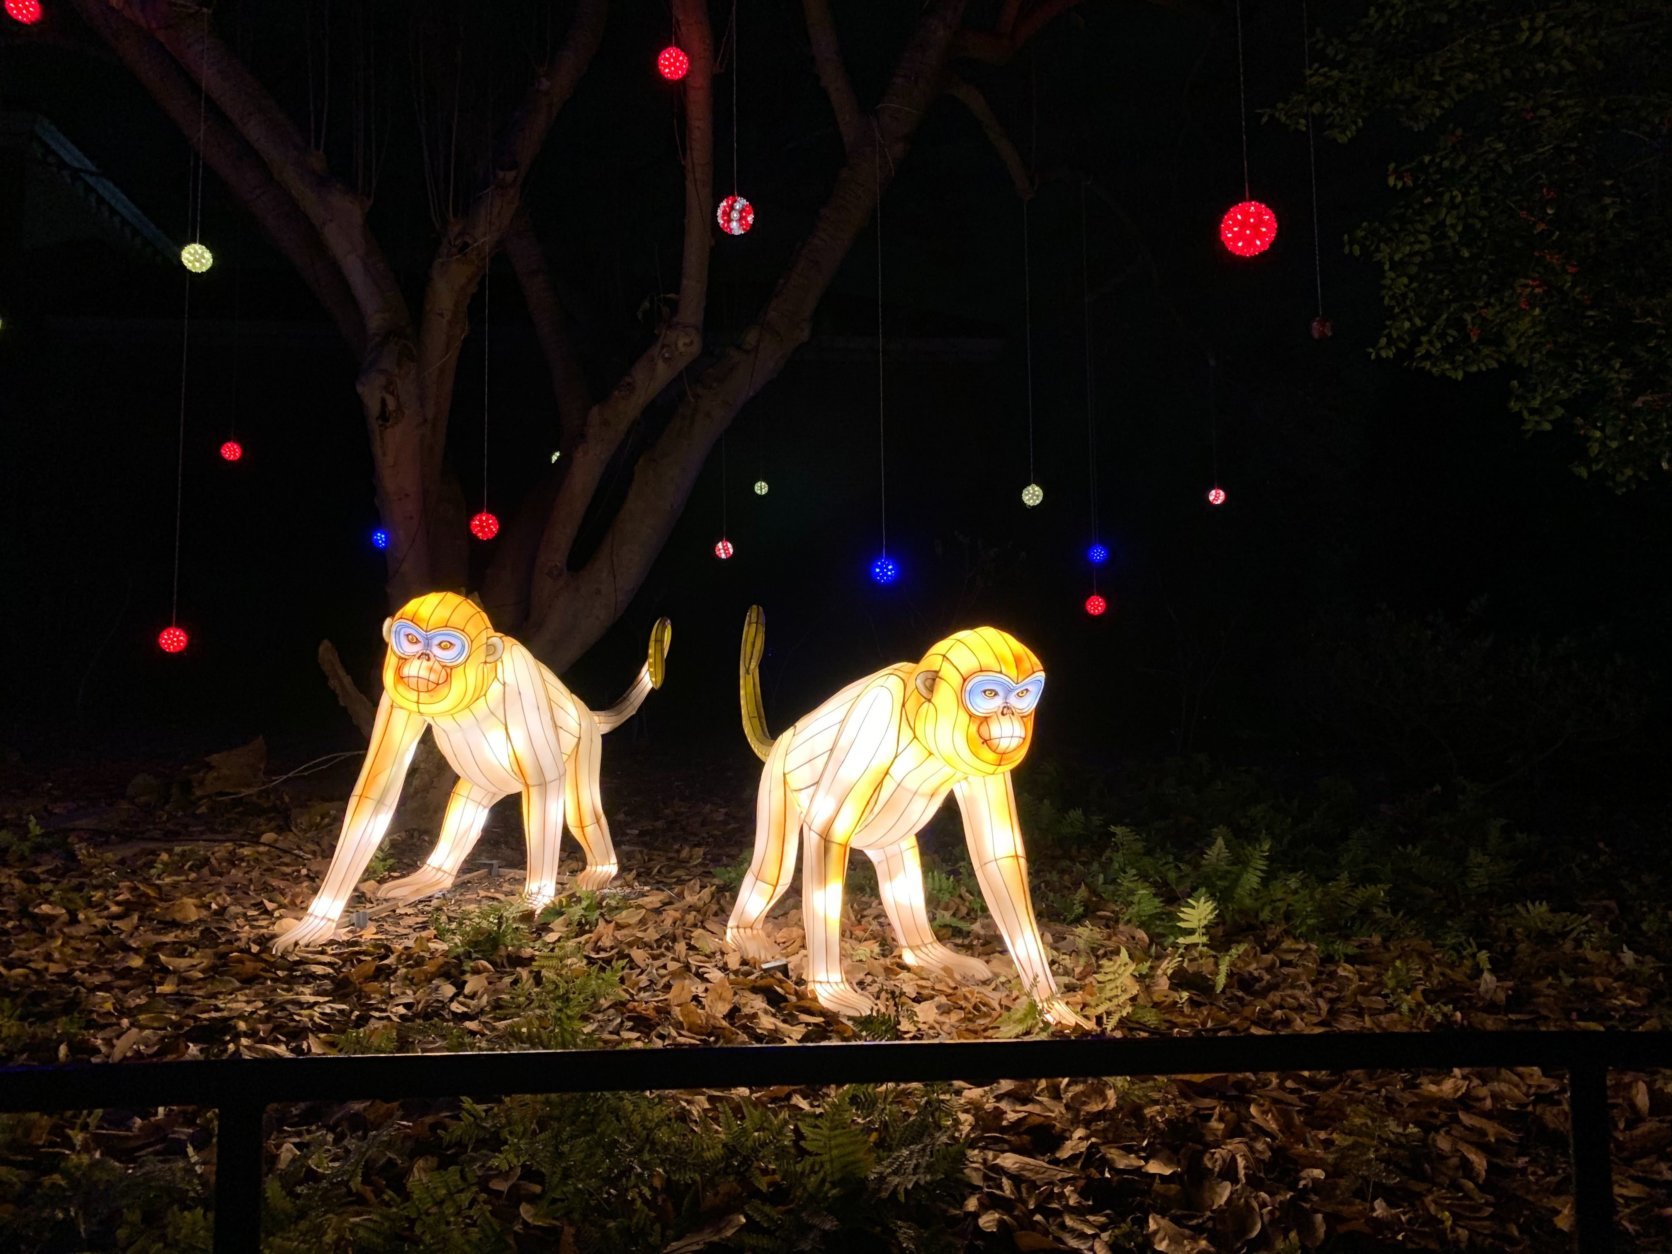 ZooLights returns to the National Zoo from Nov. 29 until Jan. 1.  